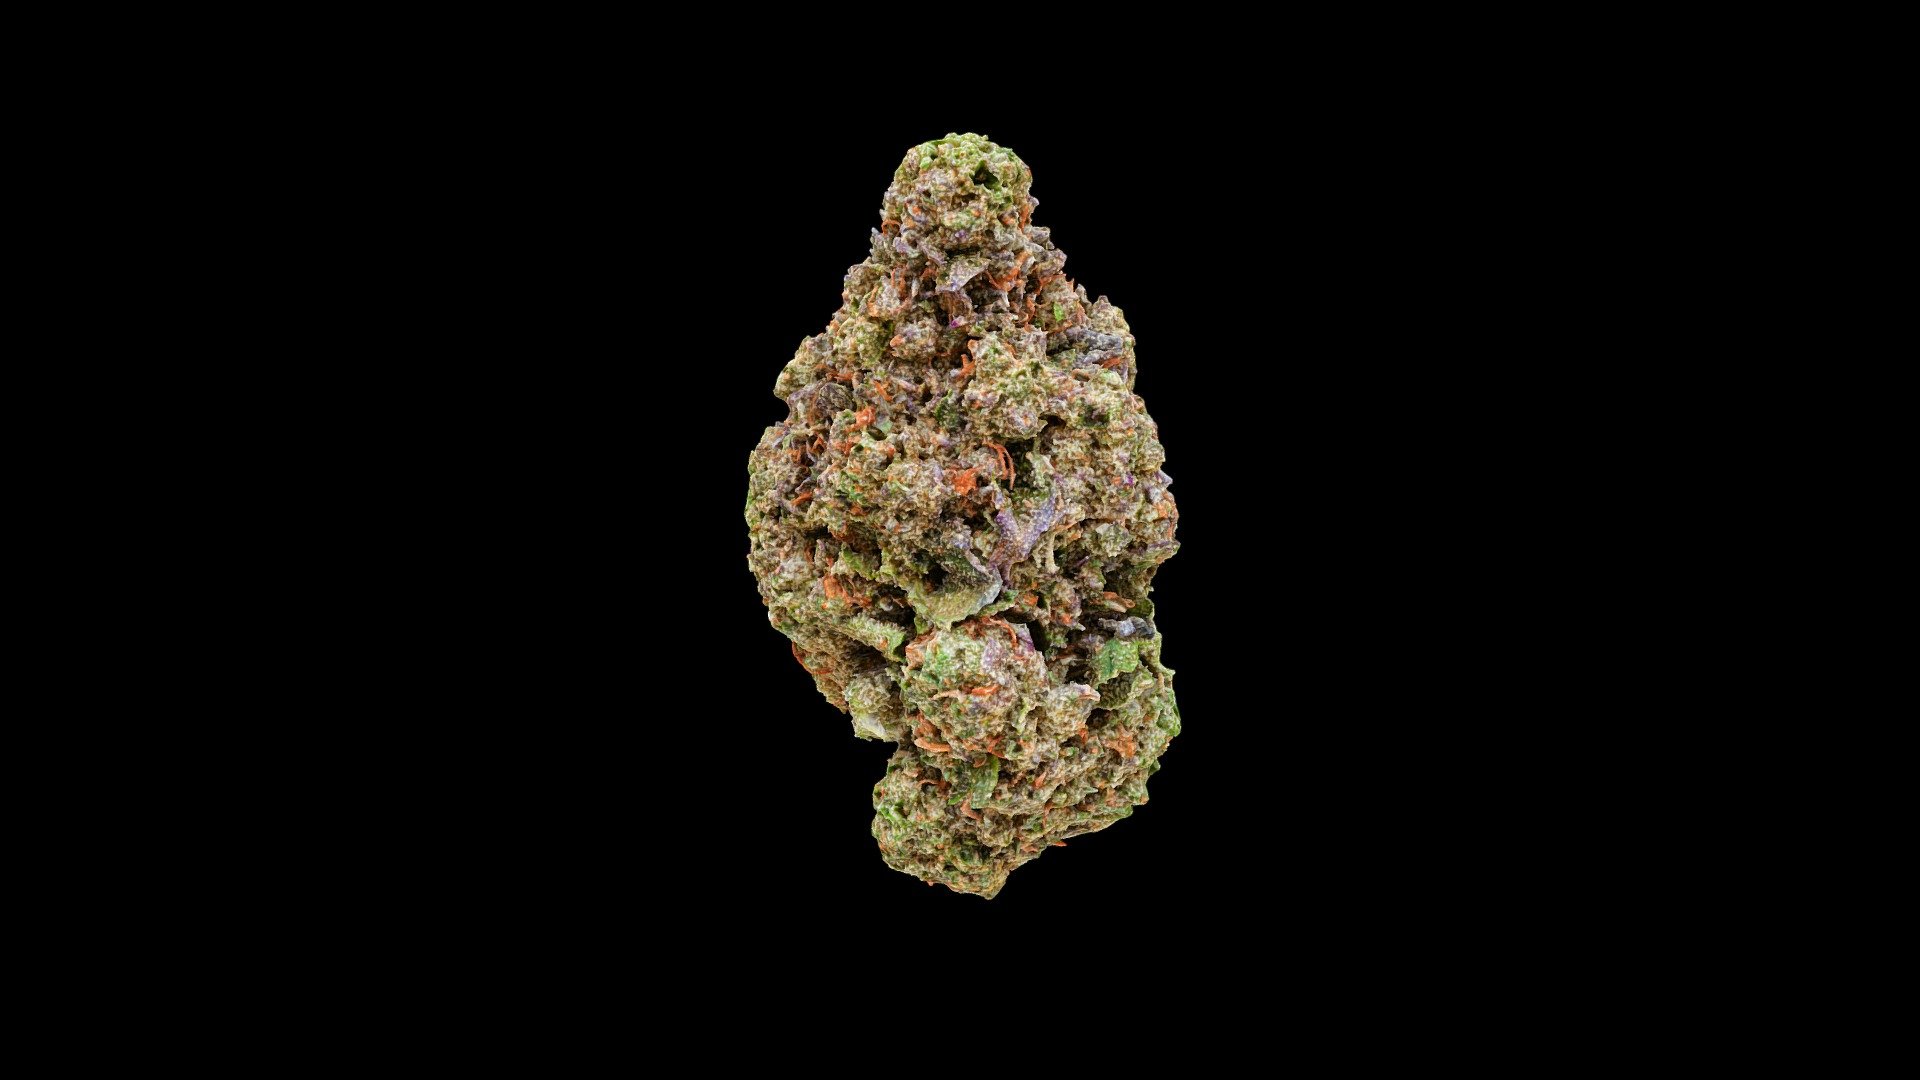 Cannabis bud, Truffle Cake strain, created using photogrammetry. To be used as part of an NFT collection, and for demonstrating 3D cannabis menu capabilities.

Equipment used: Sony A7R IV, 3DS Max.

Not for sale 3d model